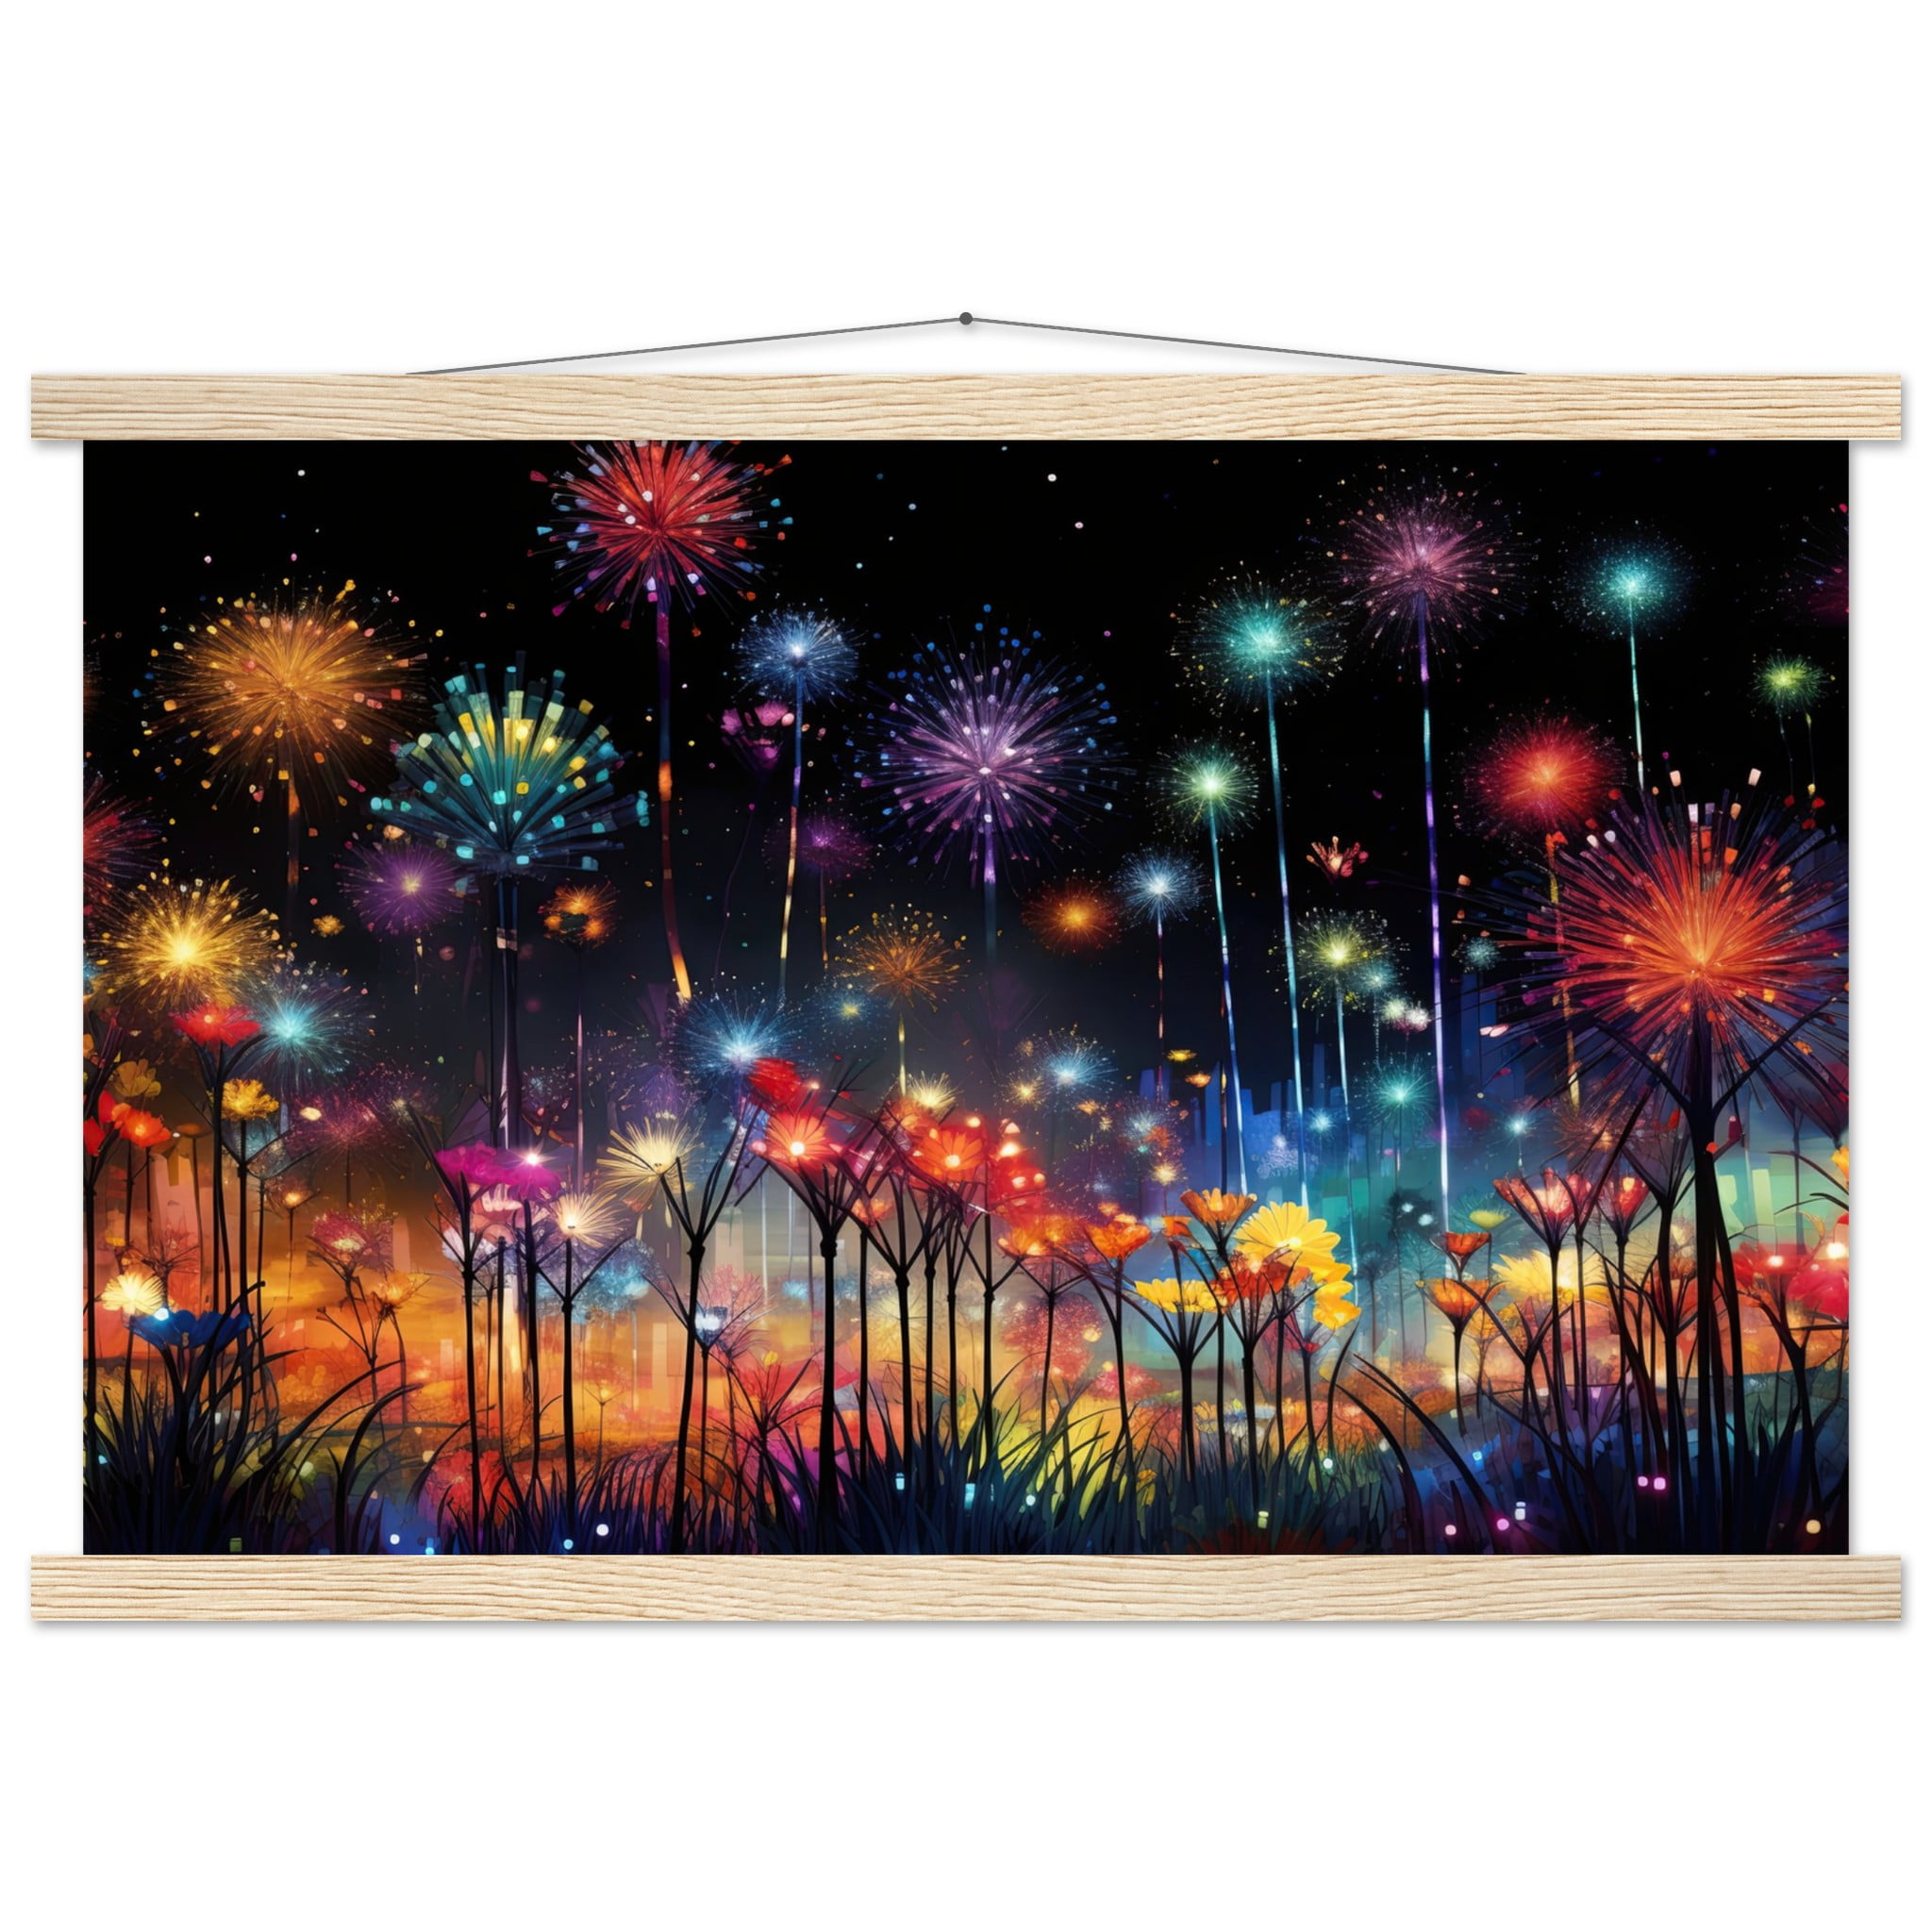 Fireworks and Flowers of Light and Color – Art Print with Hanger – 40×60 cm / 16×24″, Natural wood wall hanger